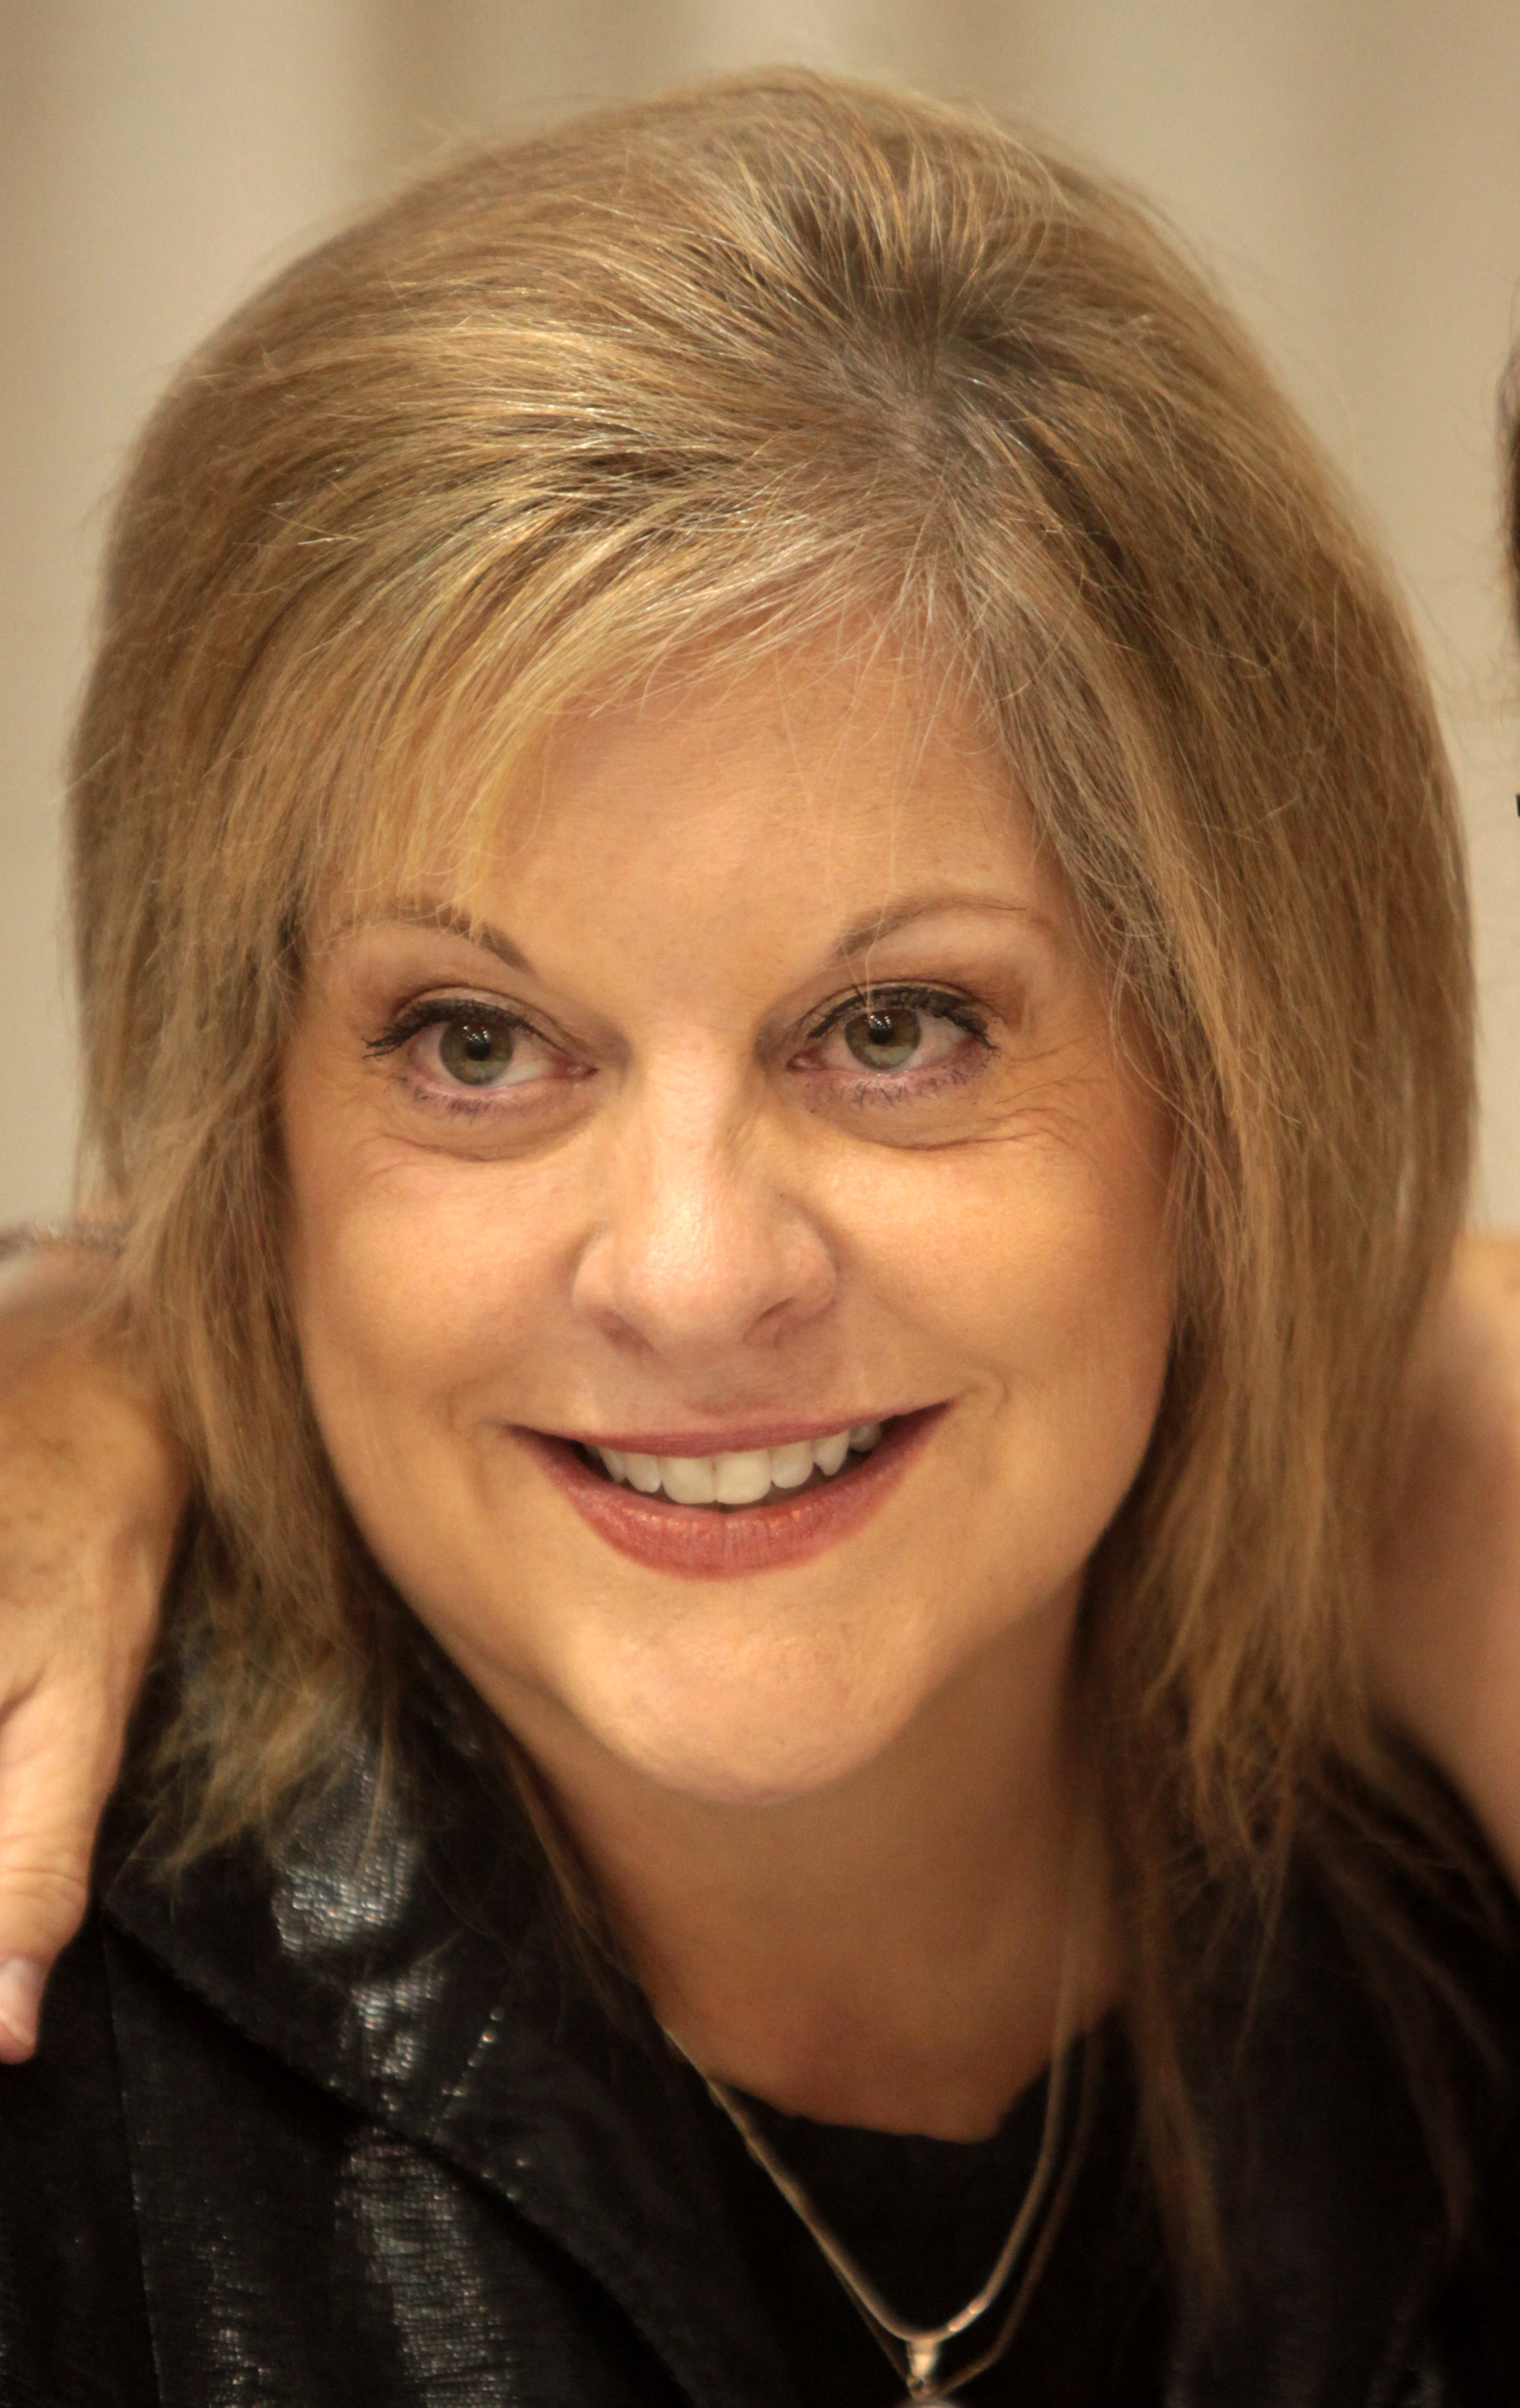 Pictures of nancy grace